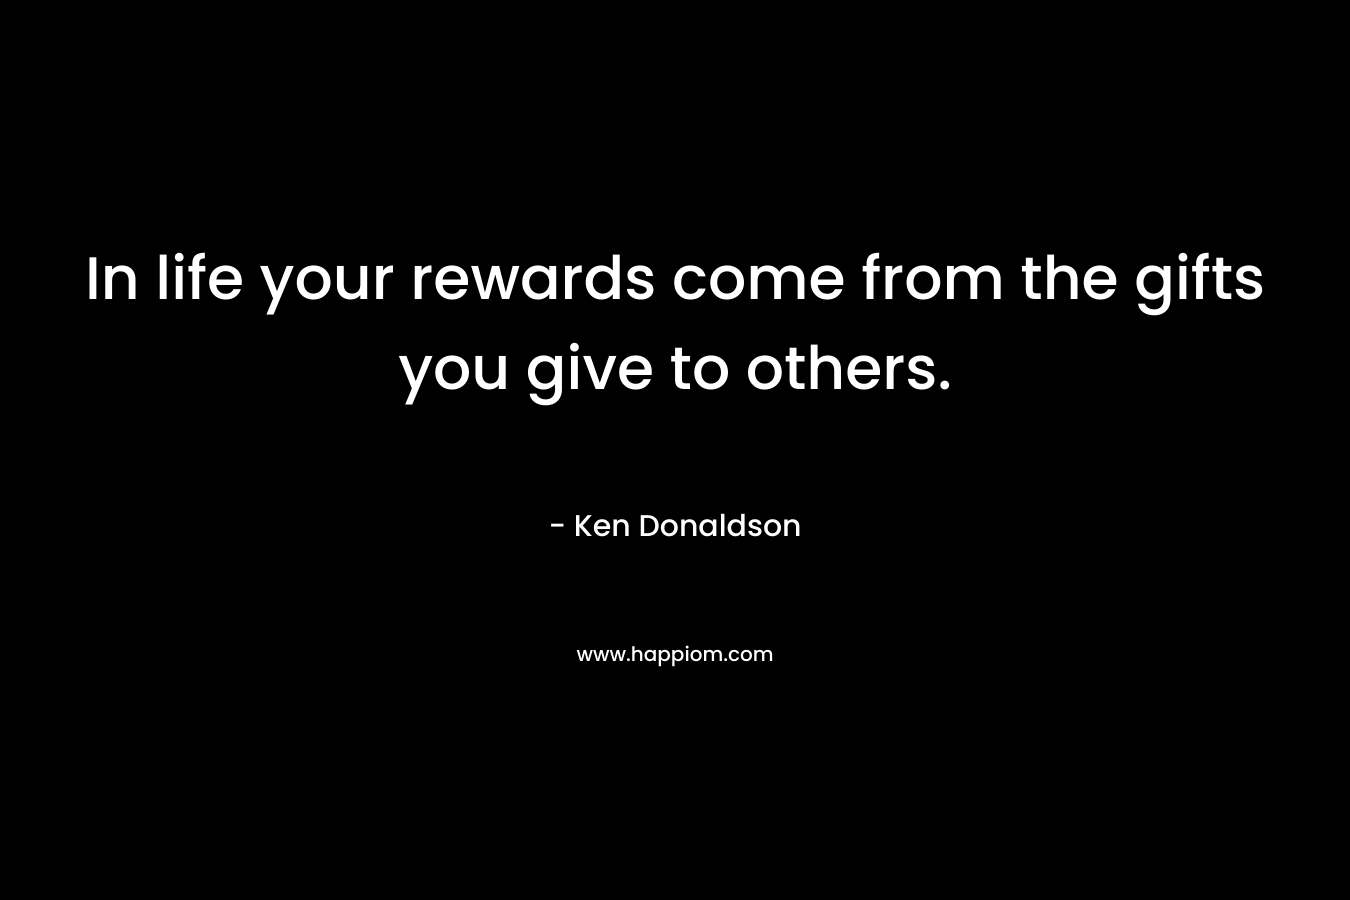 In life your rewards come from the gifts you give to others.